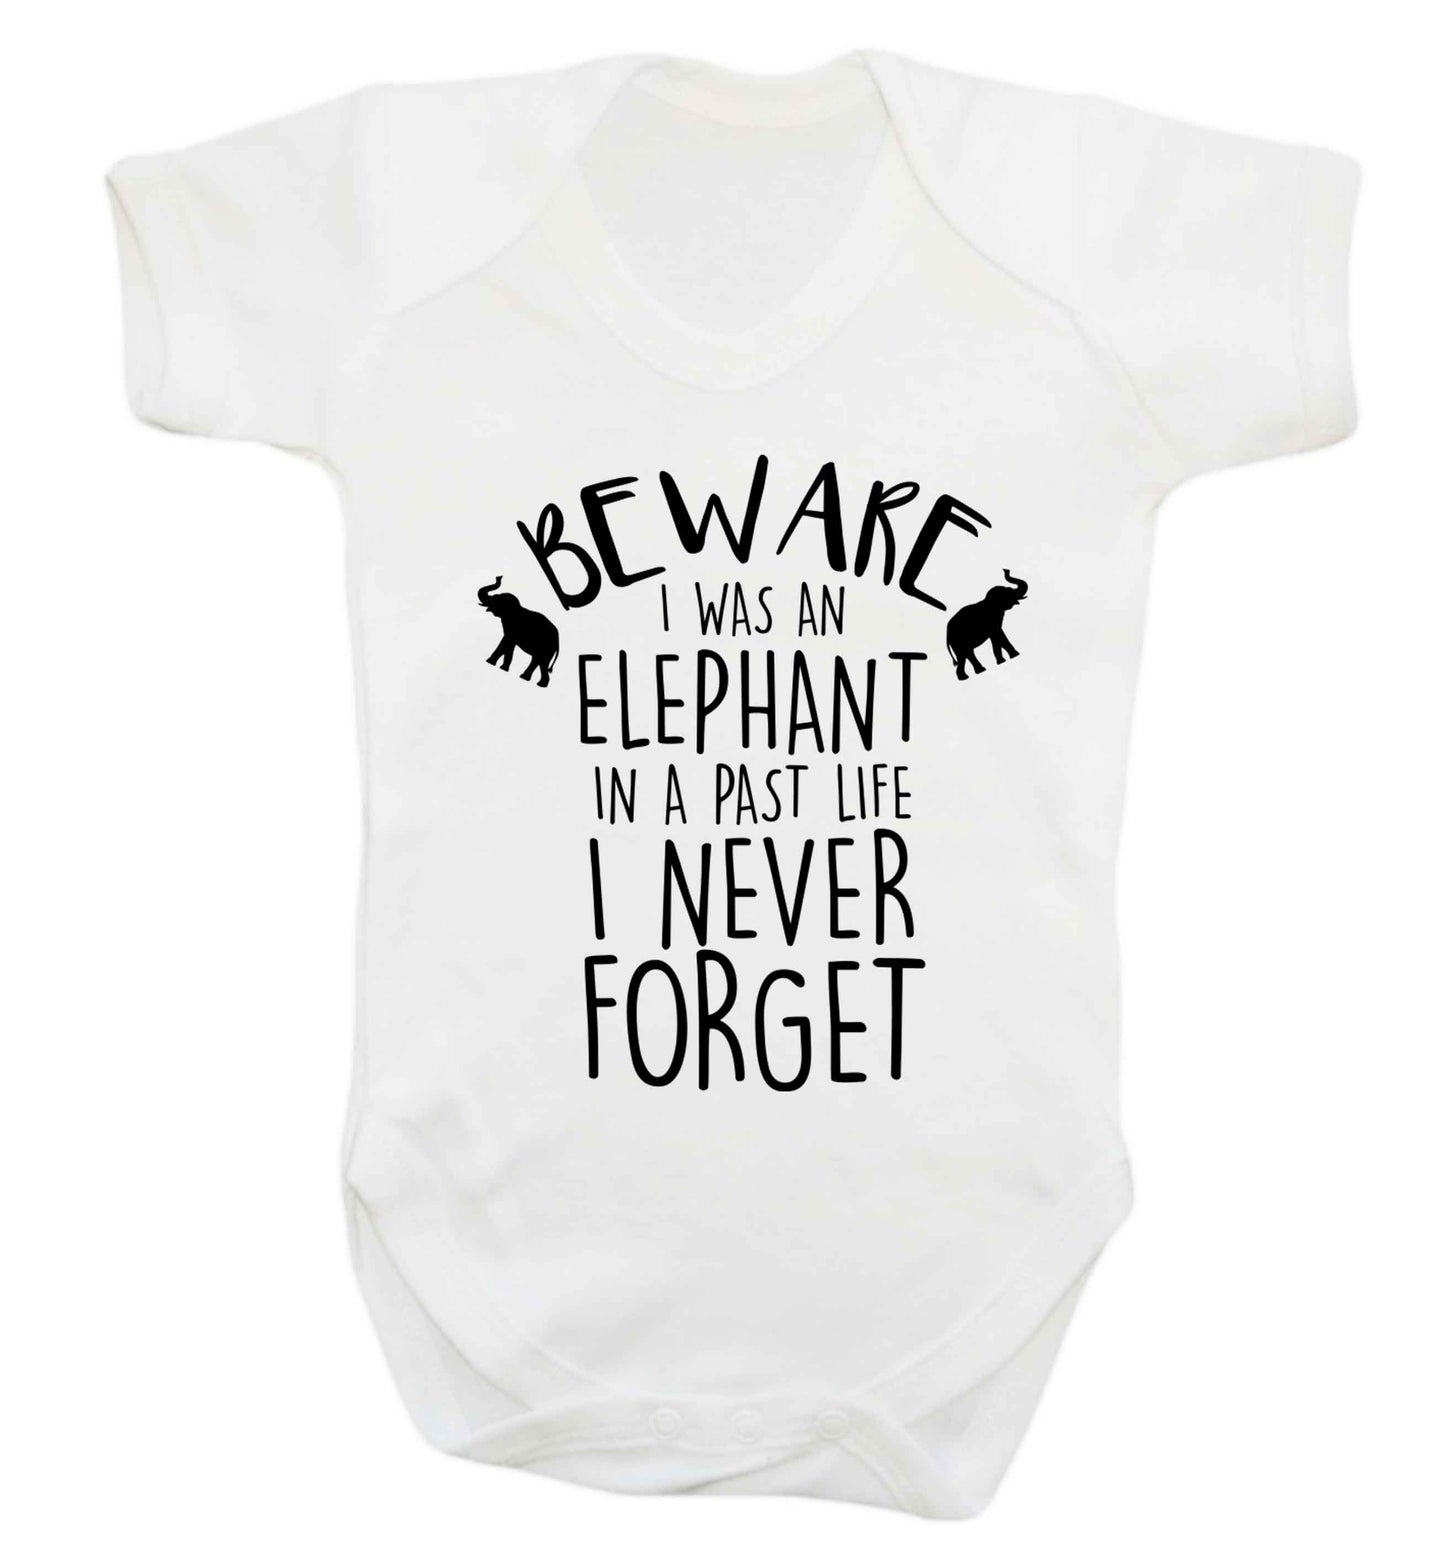 Beware I was an elephant in my past life I never forget Baby Vest white 18-24 months